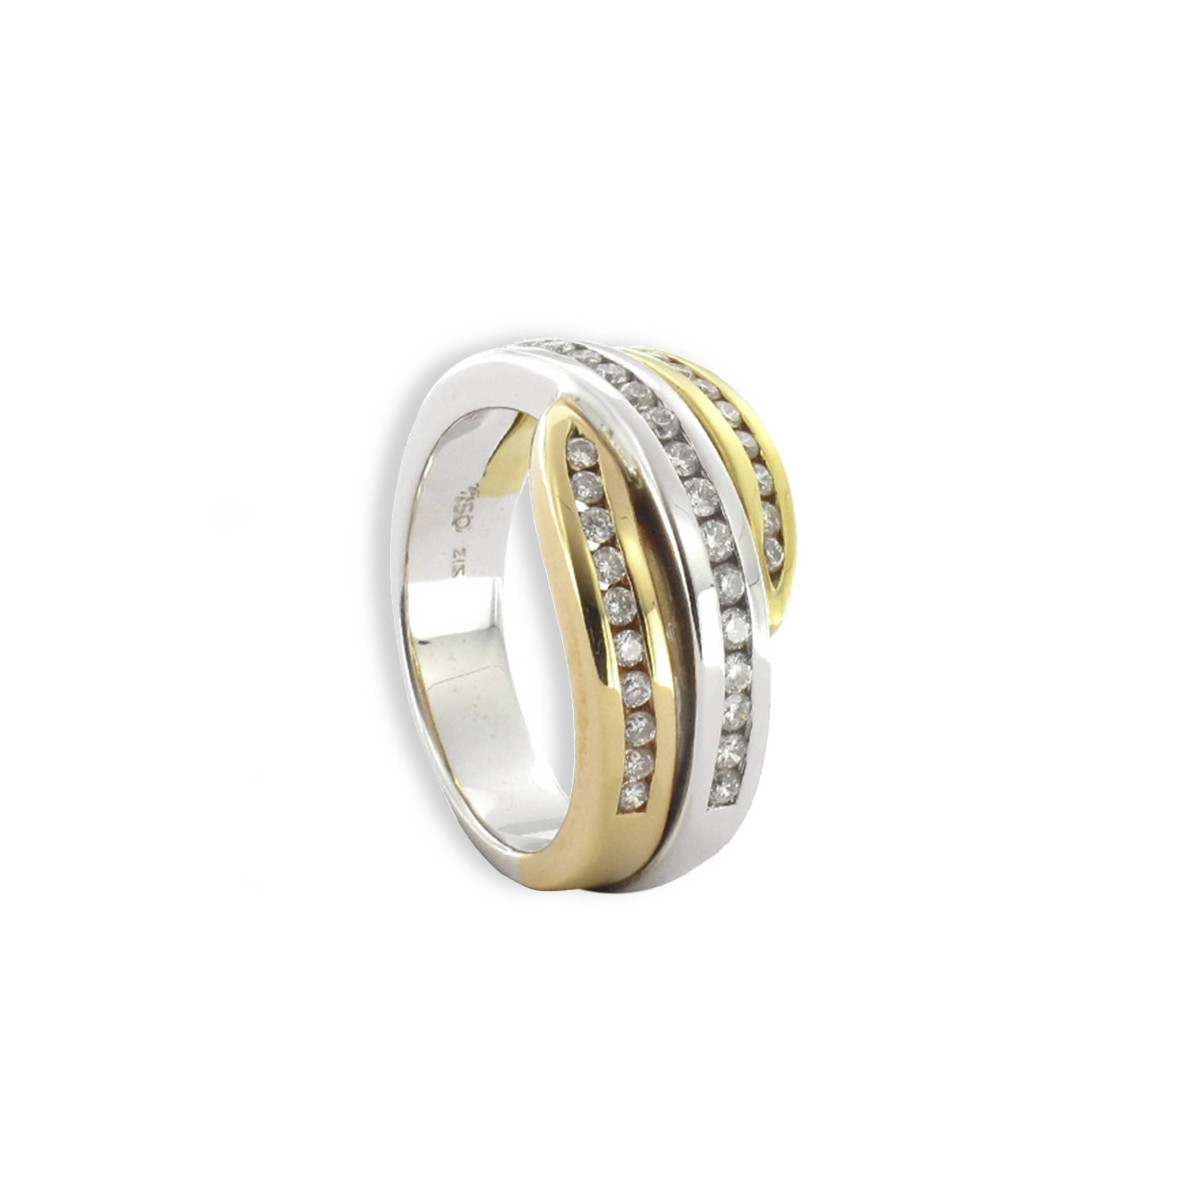 3 COLORS GOLD RING WITH DIAMONDS